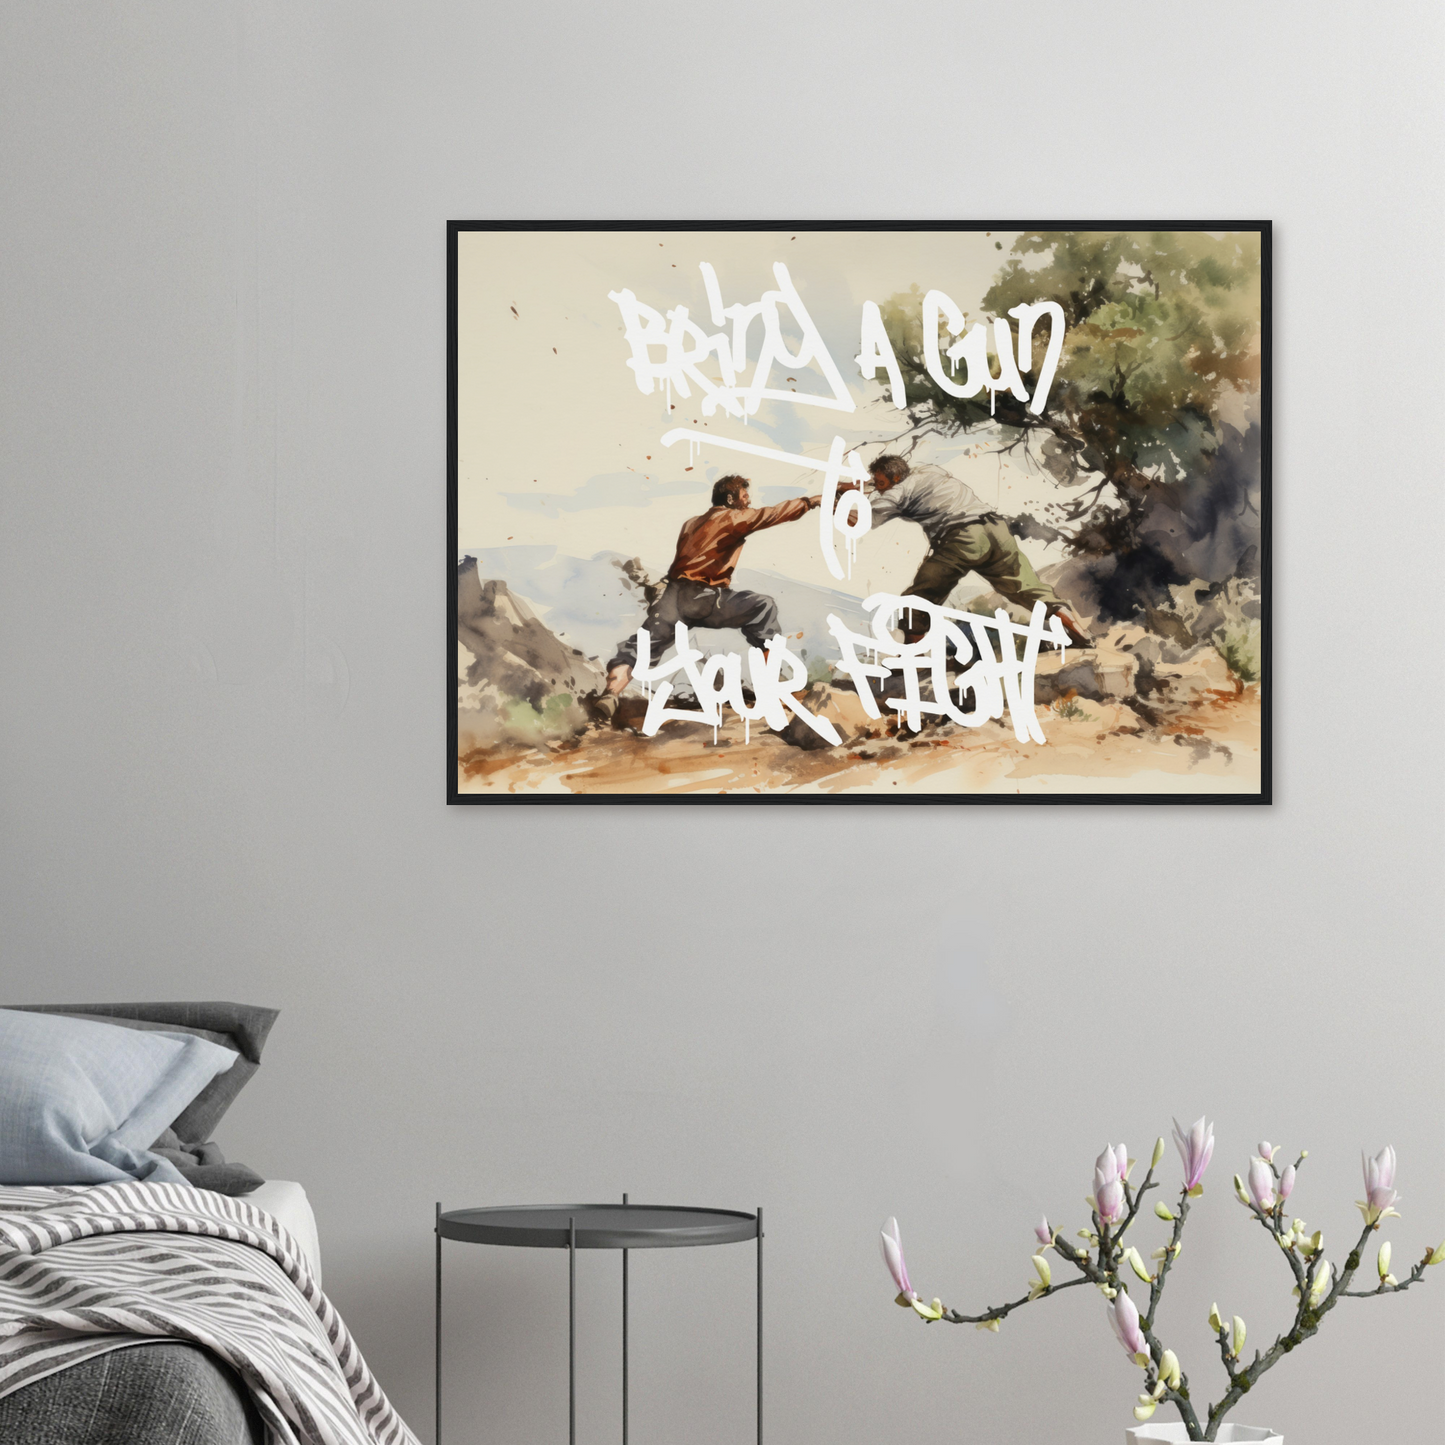 Affordable Museum Quality Poster / Print, Posterb.comGUN FIGHT! | Affordable Museum Quality Poster with Free Shipping